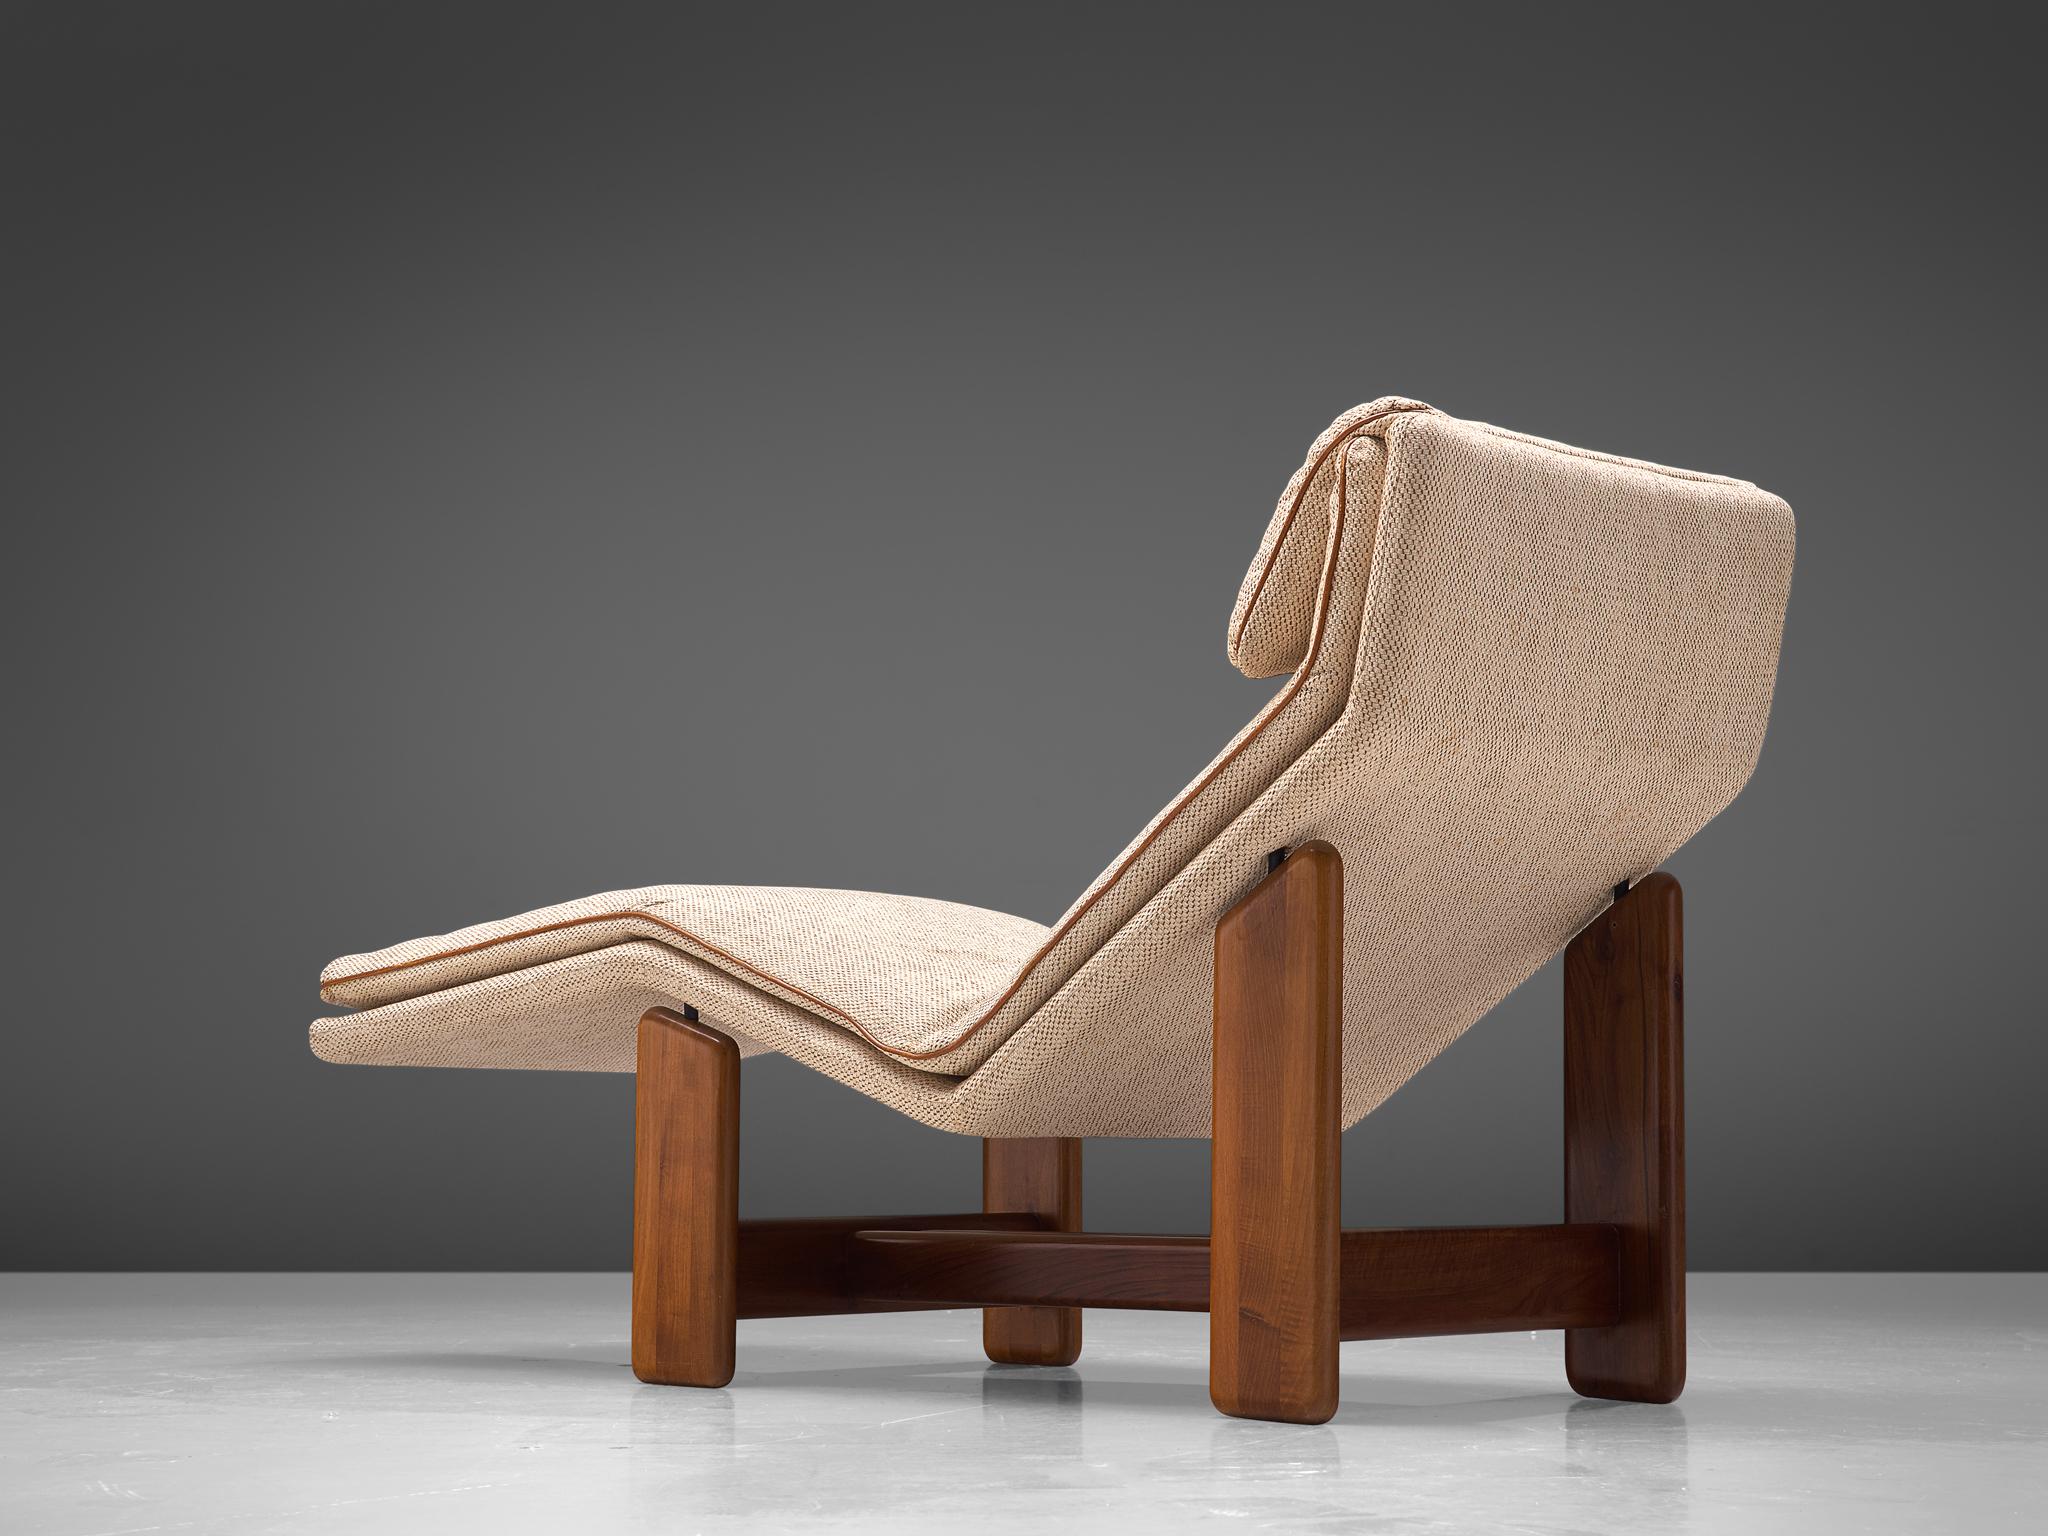 Tarcisio Colzani for Mobil Girgi, chaise loungemodel ' Periplo', fabric, leather and walnut, Italy, 1970s

Sculptural daybed from Italy with a woven beige upholstery that is finished with cognac leather piping. The top has a head pillow for extra